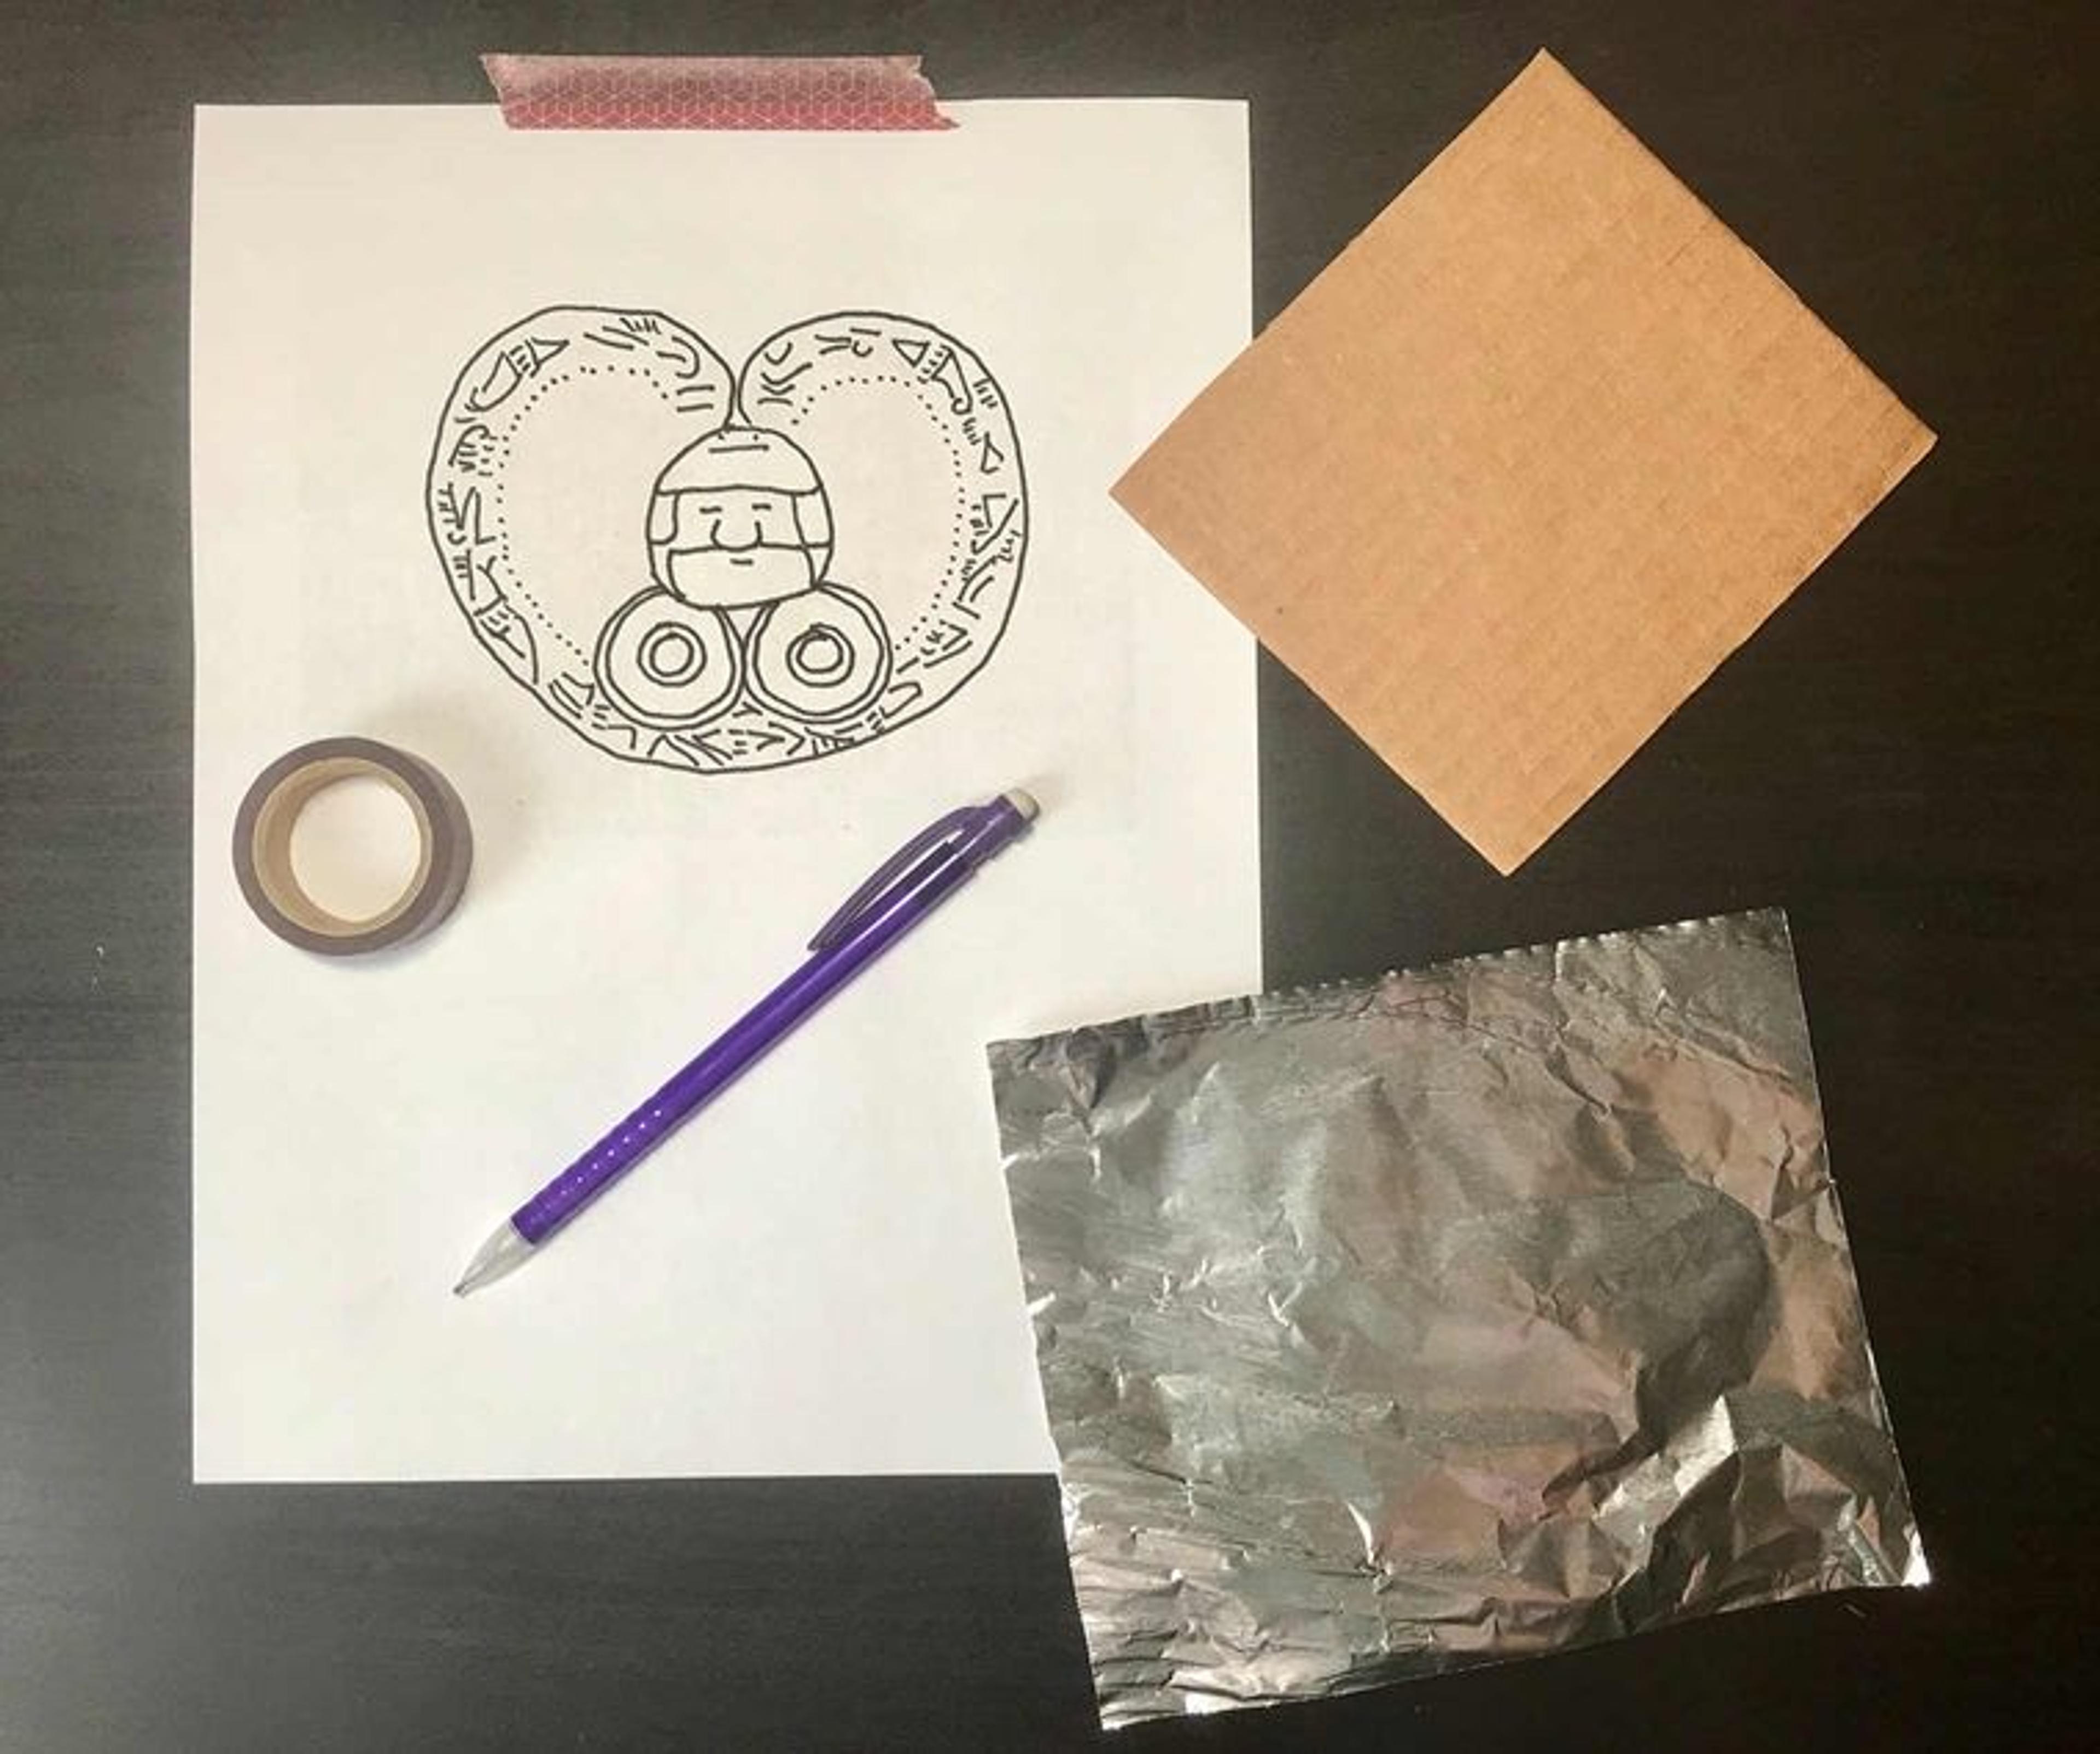 crafting materials to make your own ornament: a drawing on a pieces of paper, tape, cardboard, a pen, and a small rectangle of tin foil.